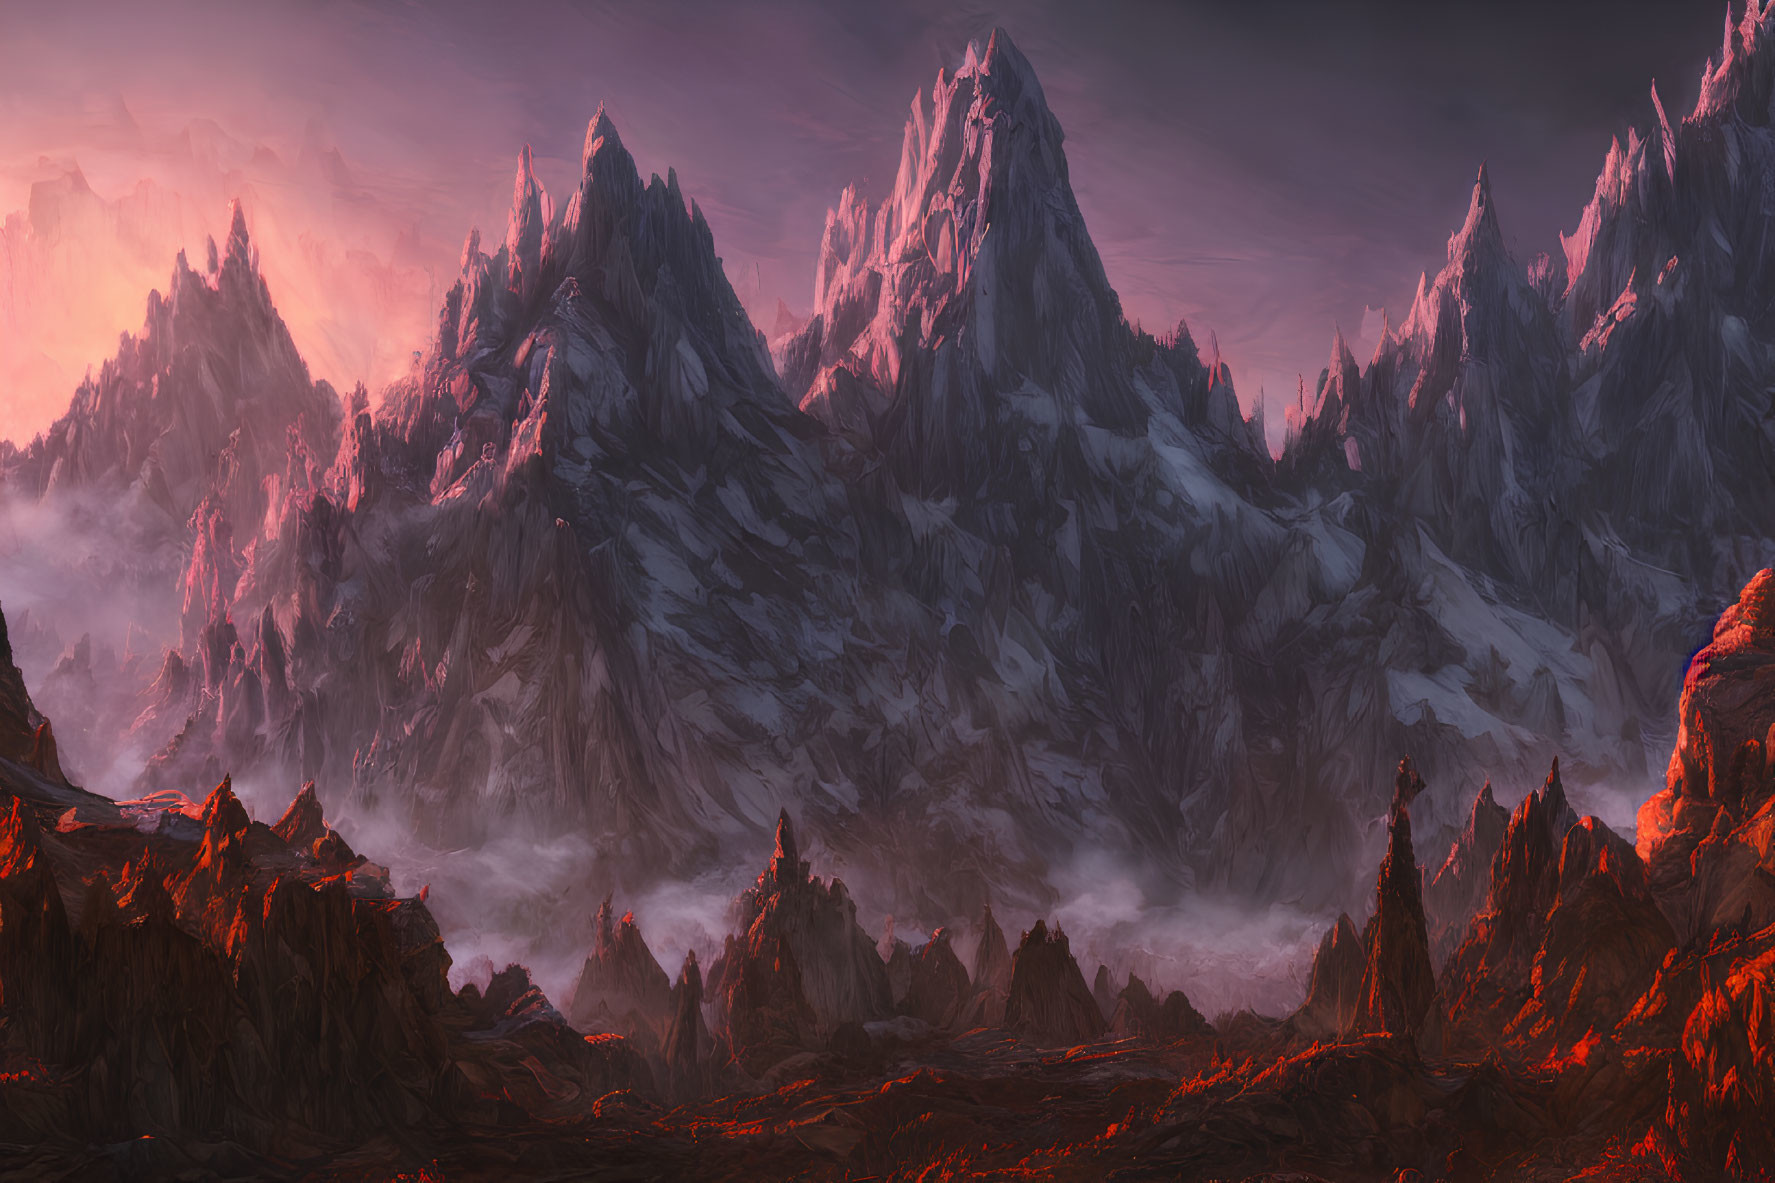 Snow-capped mountains in mist with fiery red foreground